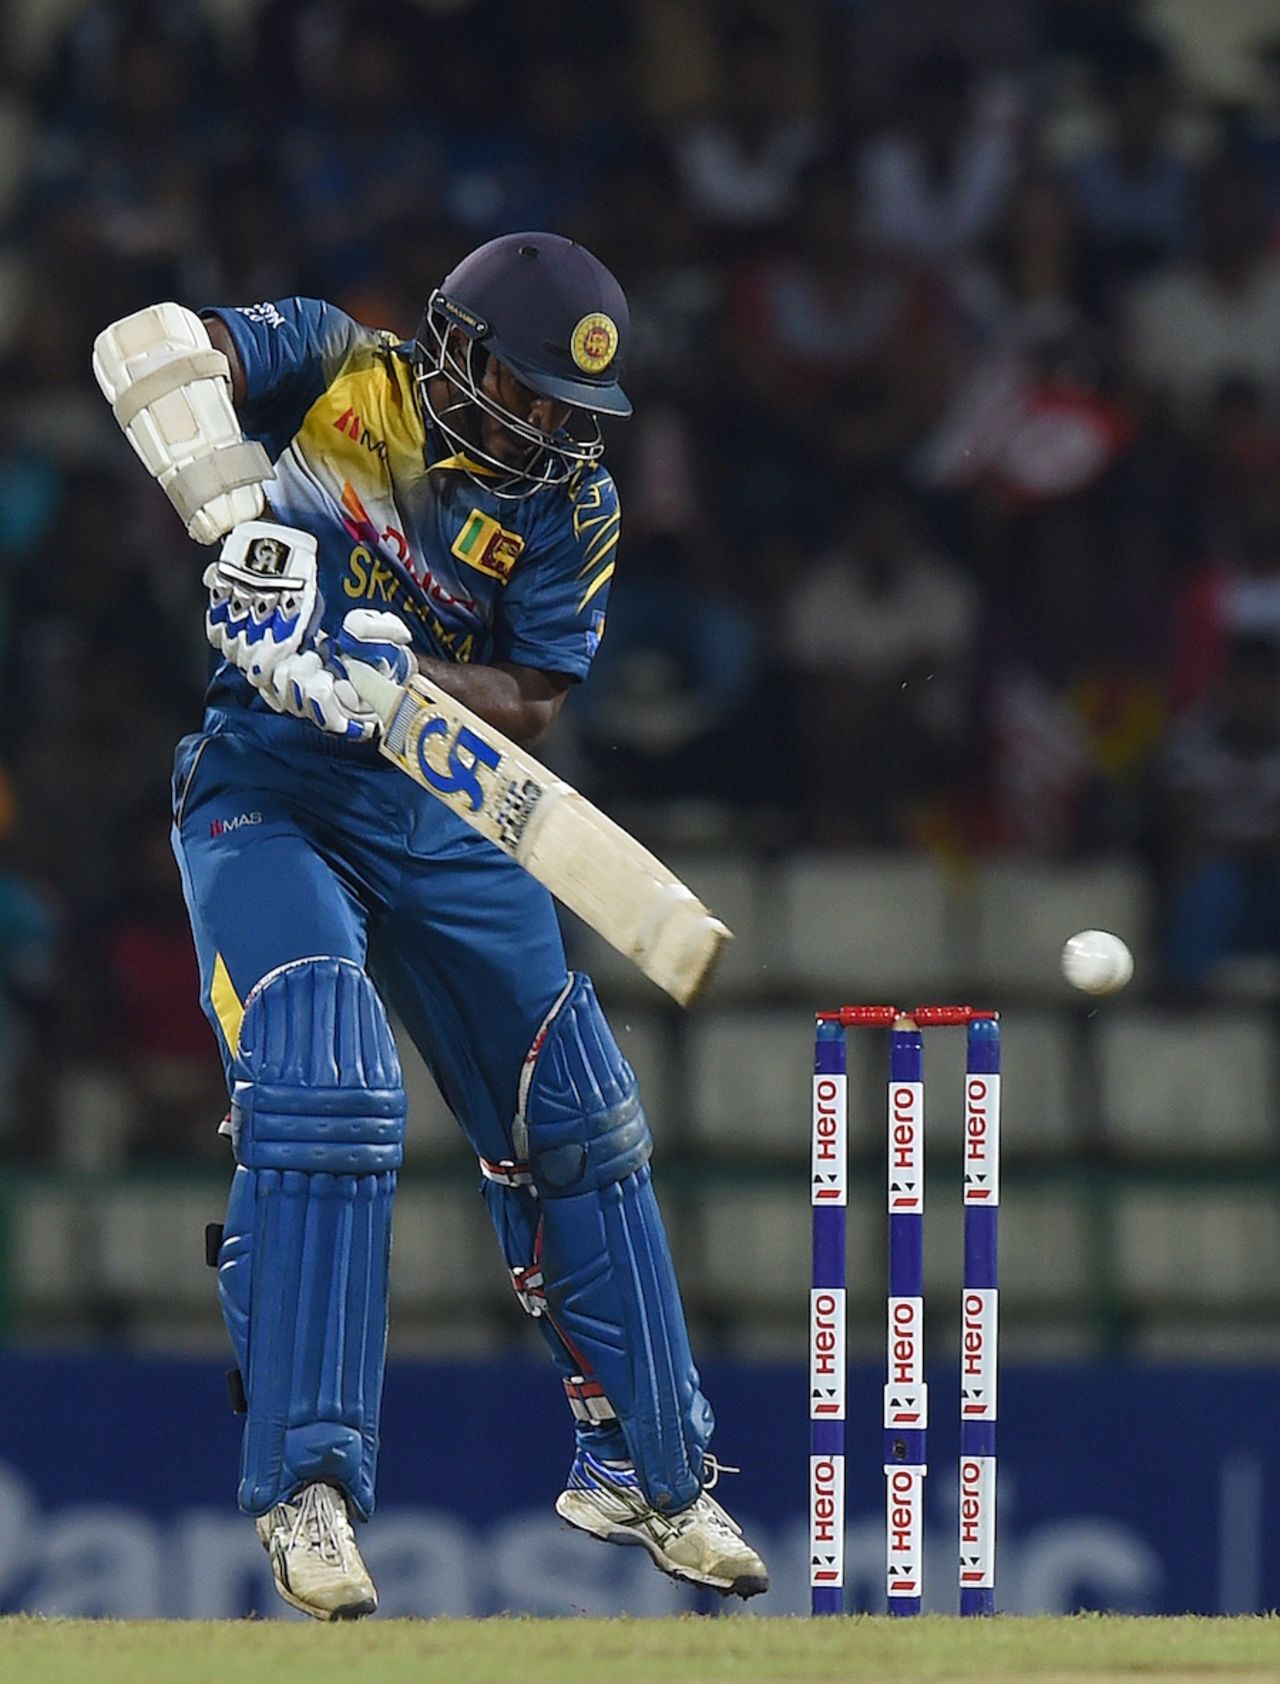 Kusal Perera gets on his toes to play through the off side, Sri Lanka v West Indies, 3rd ODI, Pallekele, November 7, 2015